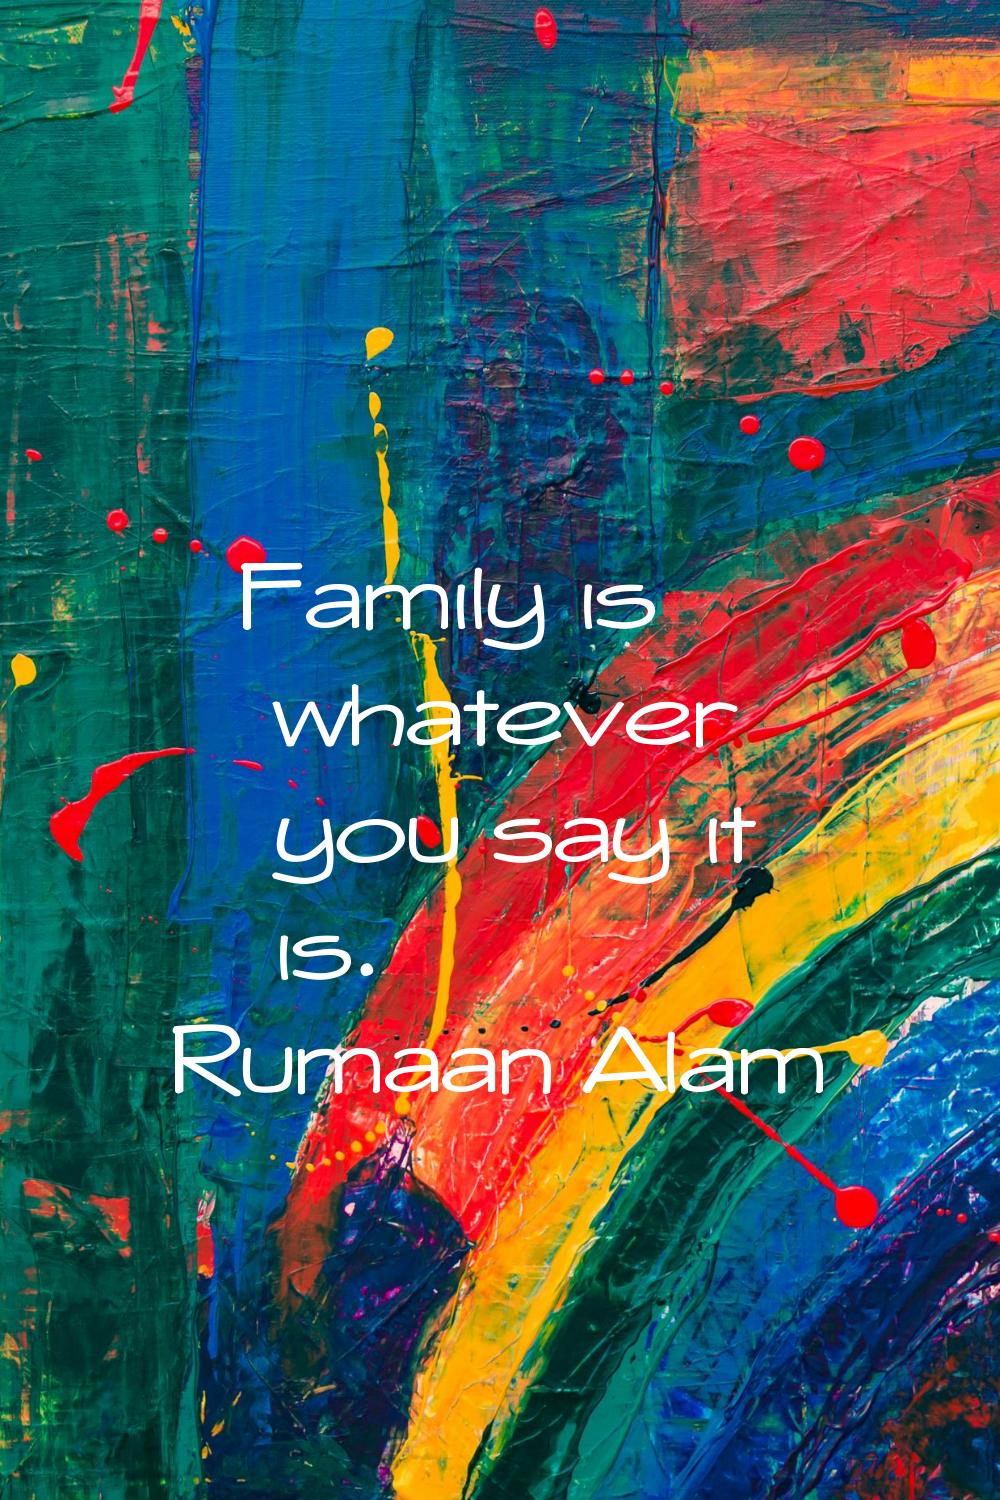 Family is whatever you say it is.